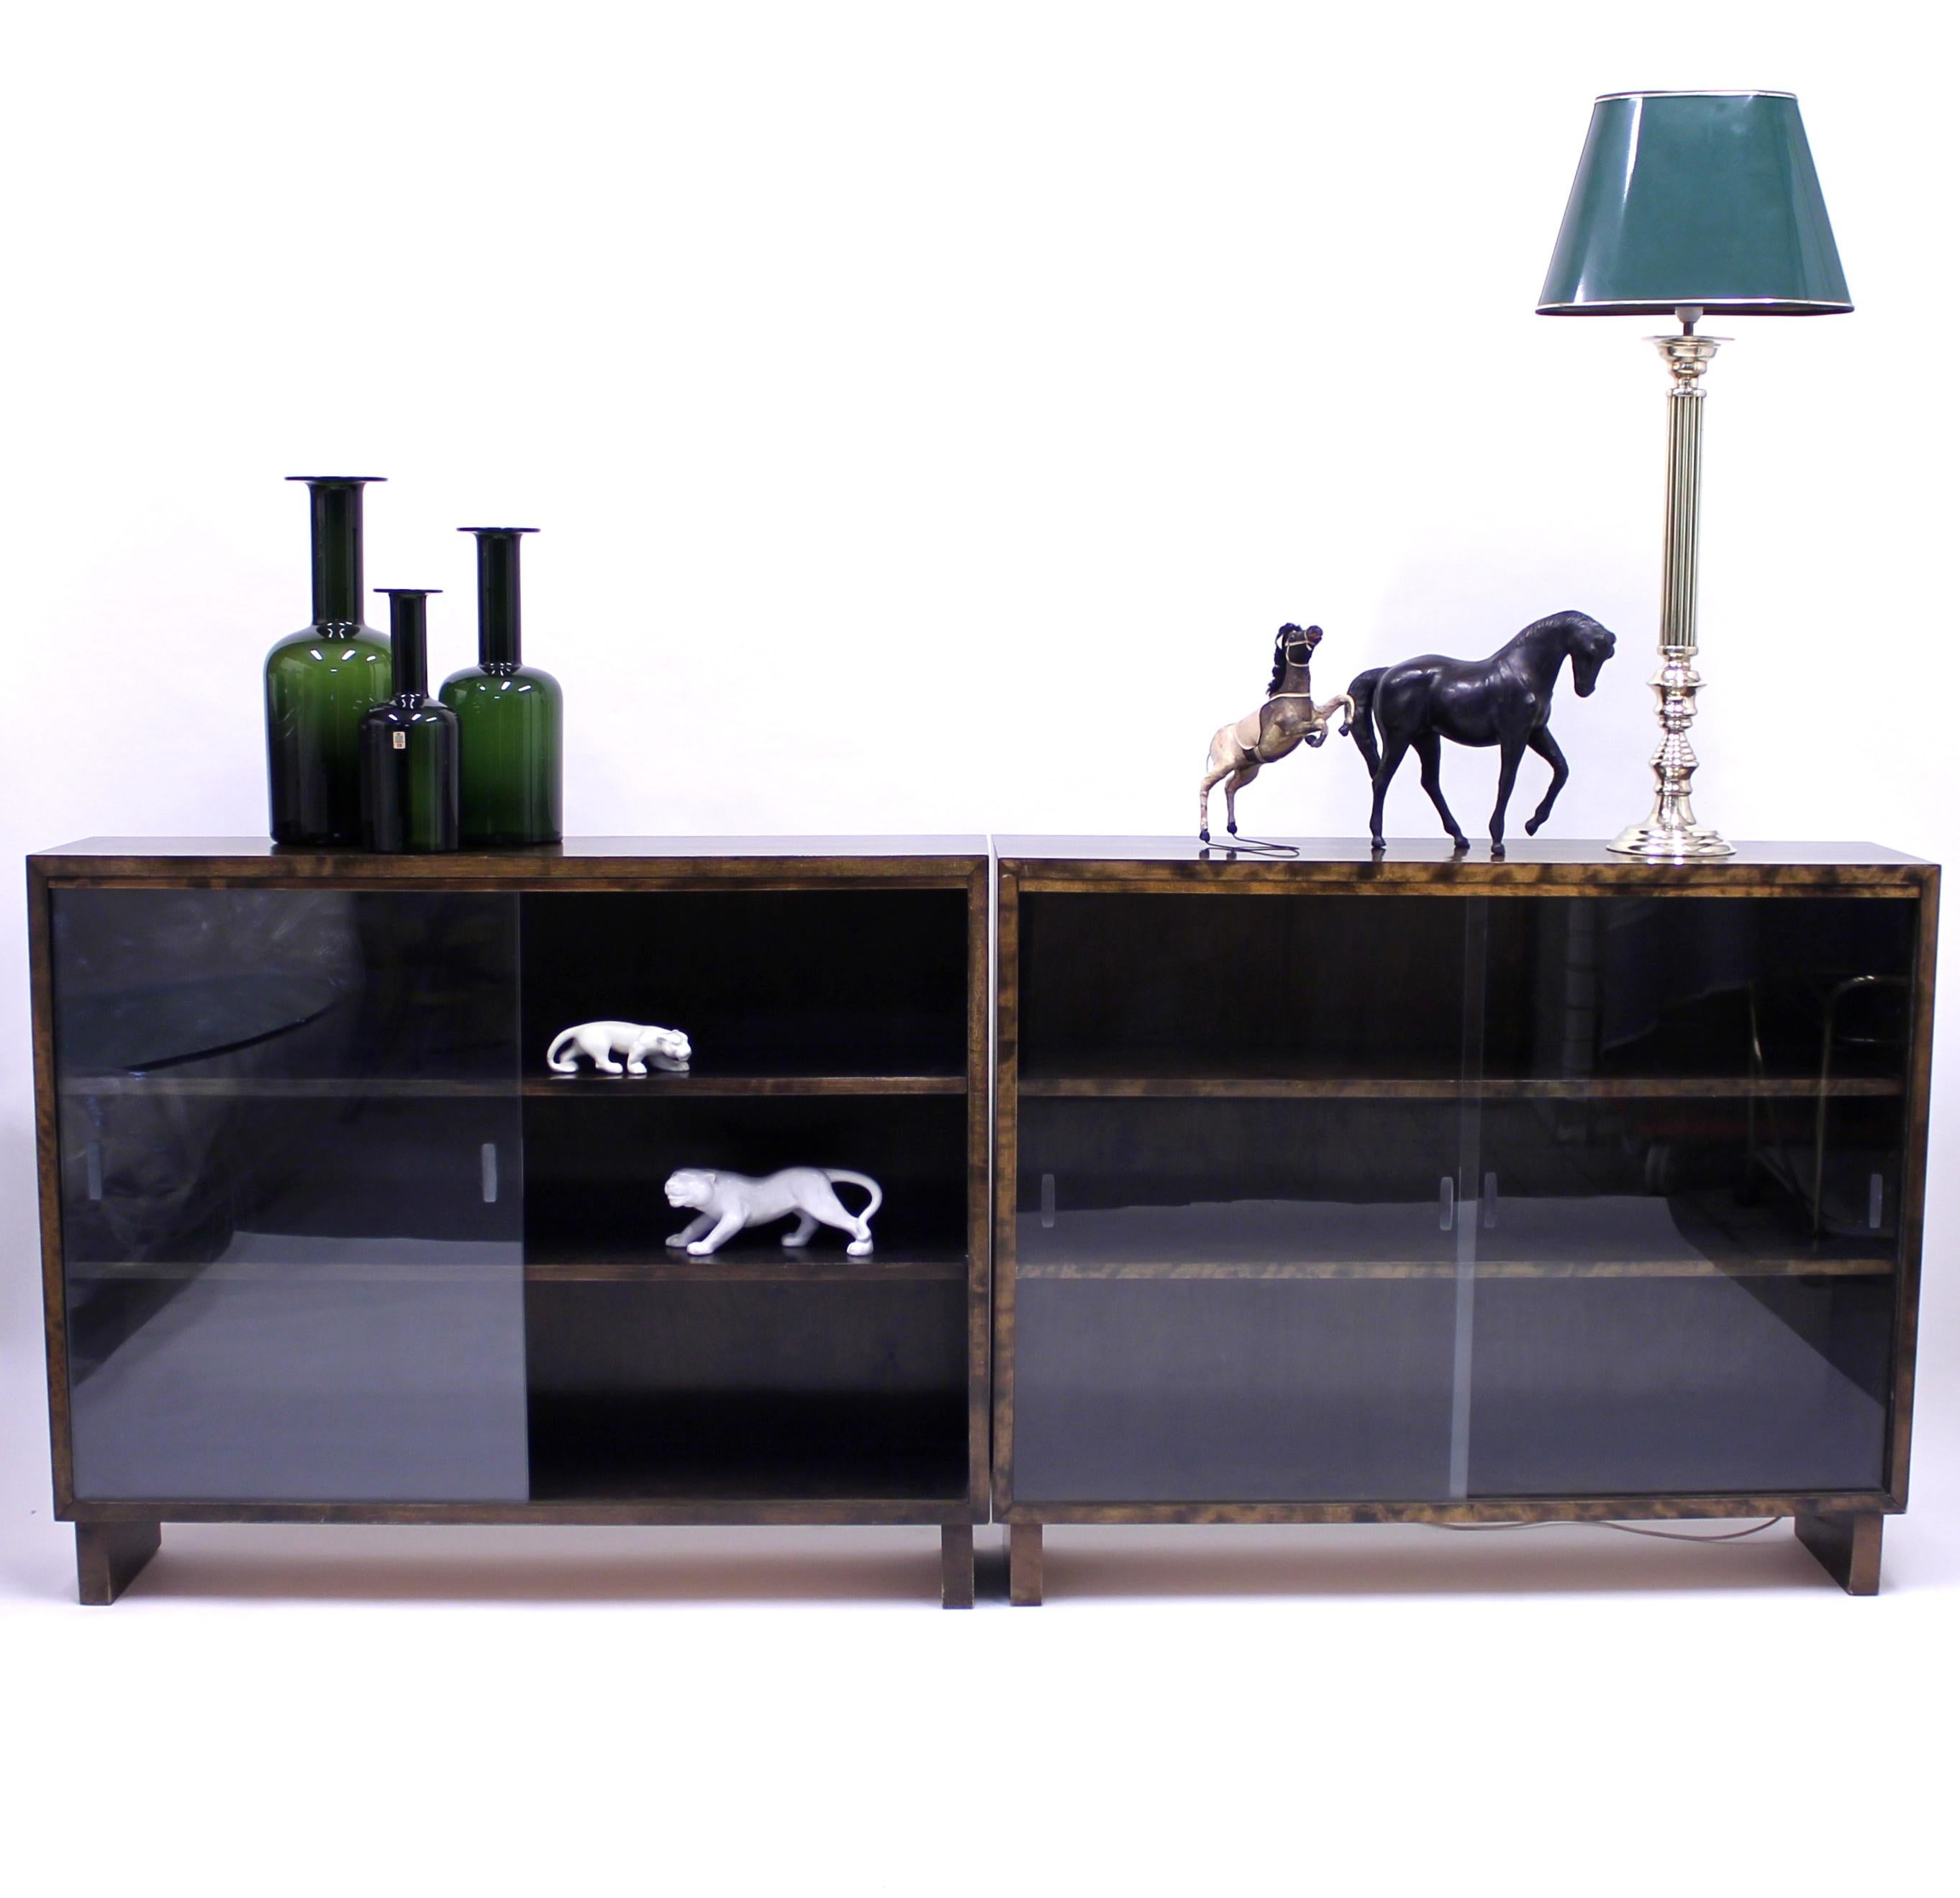 Pair of functionalist Art Deco vitrine book shelves in stained birch with sliding glass doors with three shelves behind. Made in the 1930s, most likely in Sweden. 110 cm wide each so 220 cm wide when storing them side by side. They are also